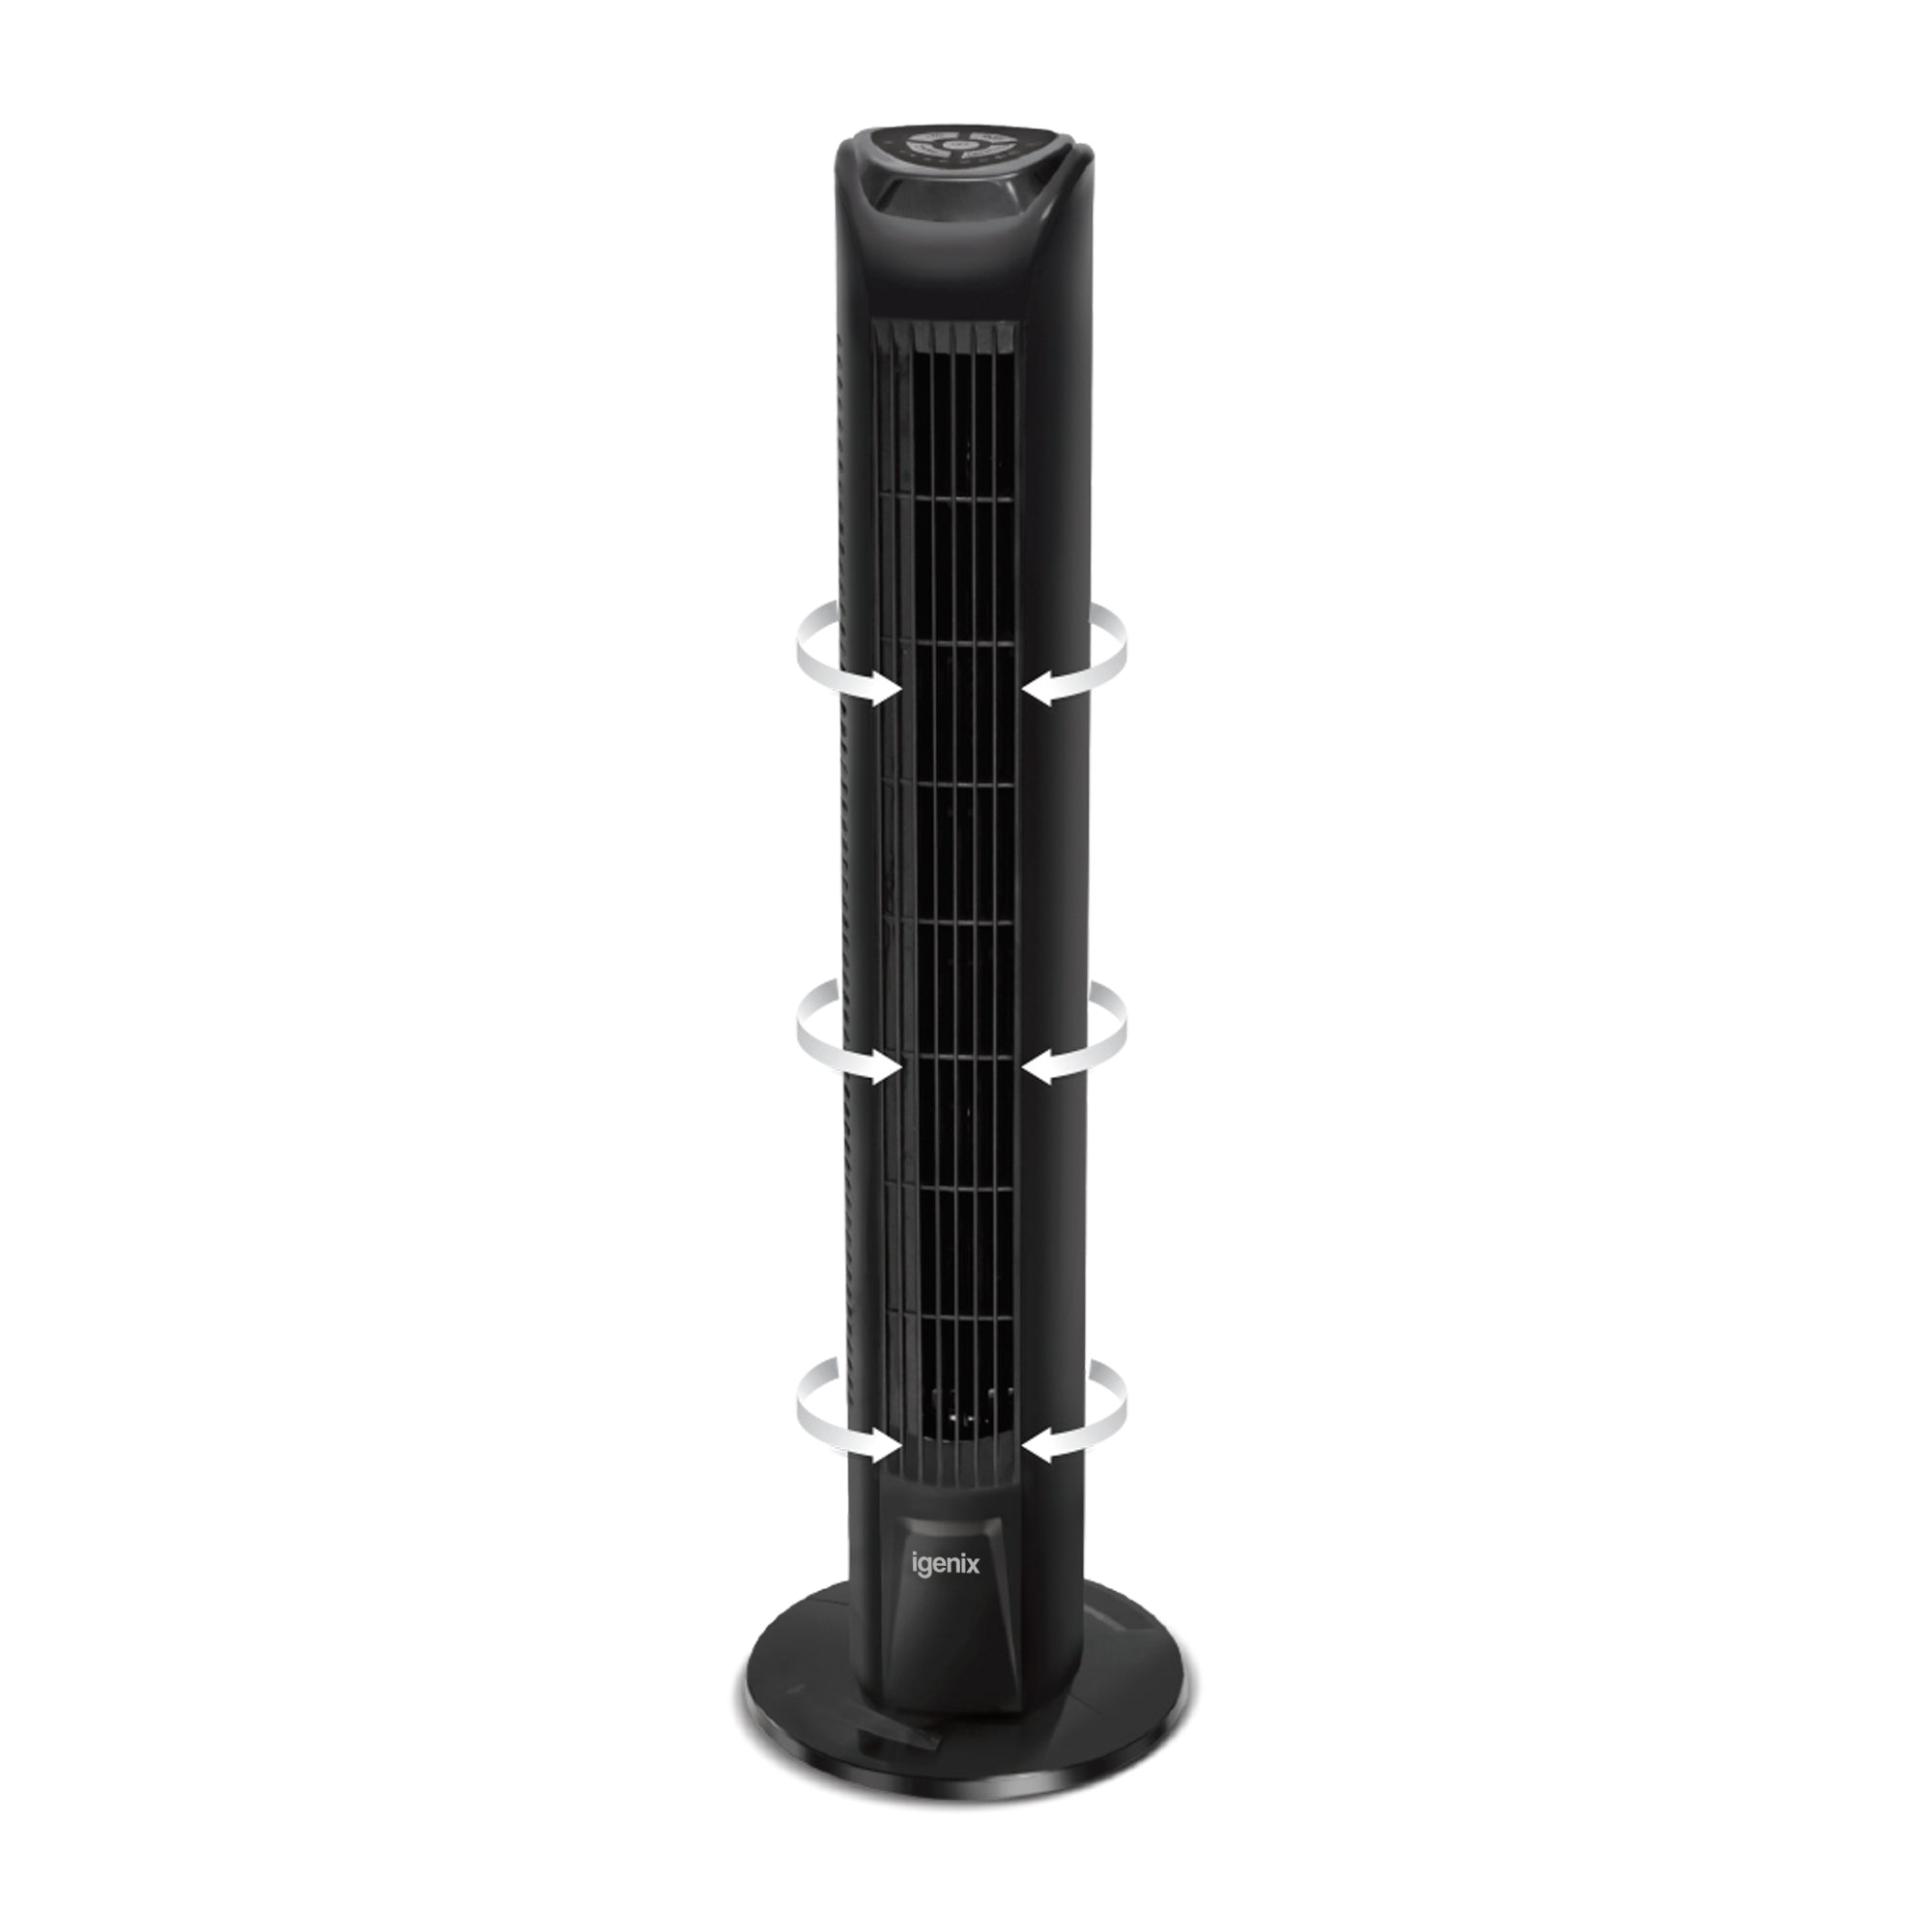 Tower Fan, Oscillating, 7.5 Hour Timer, 29 Inch, Black